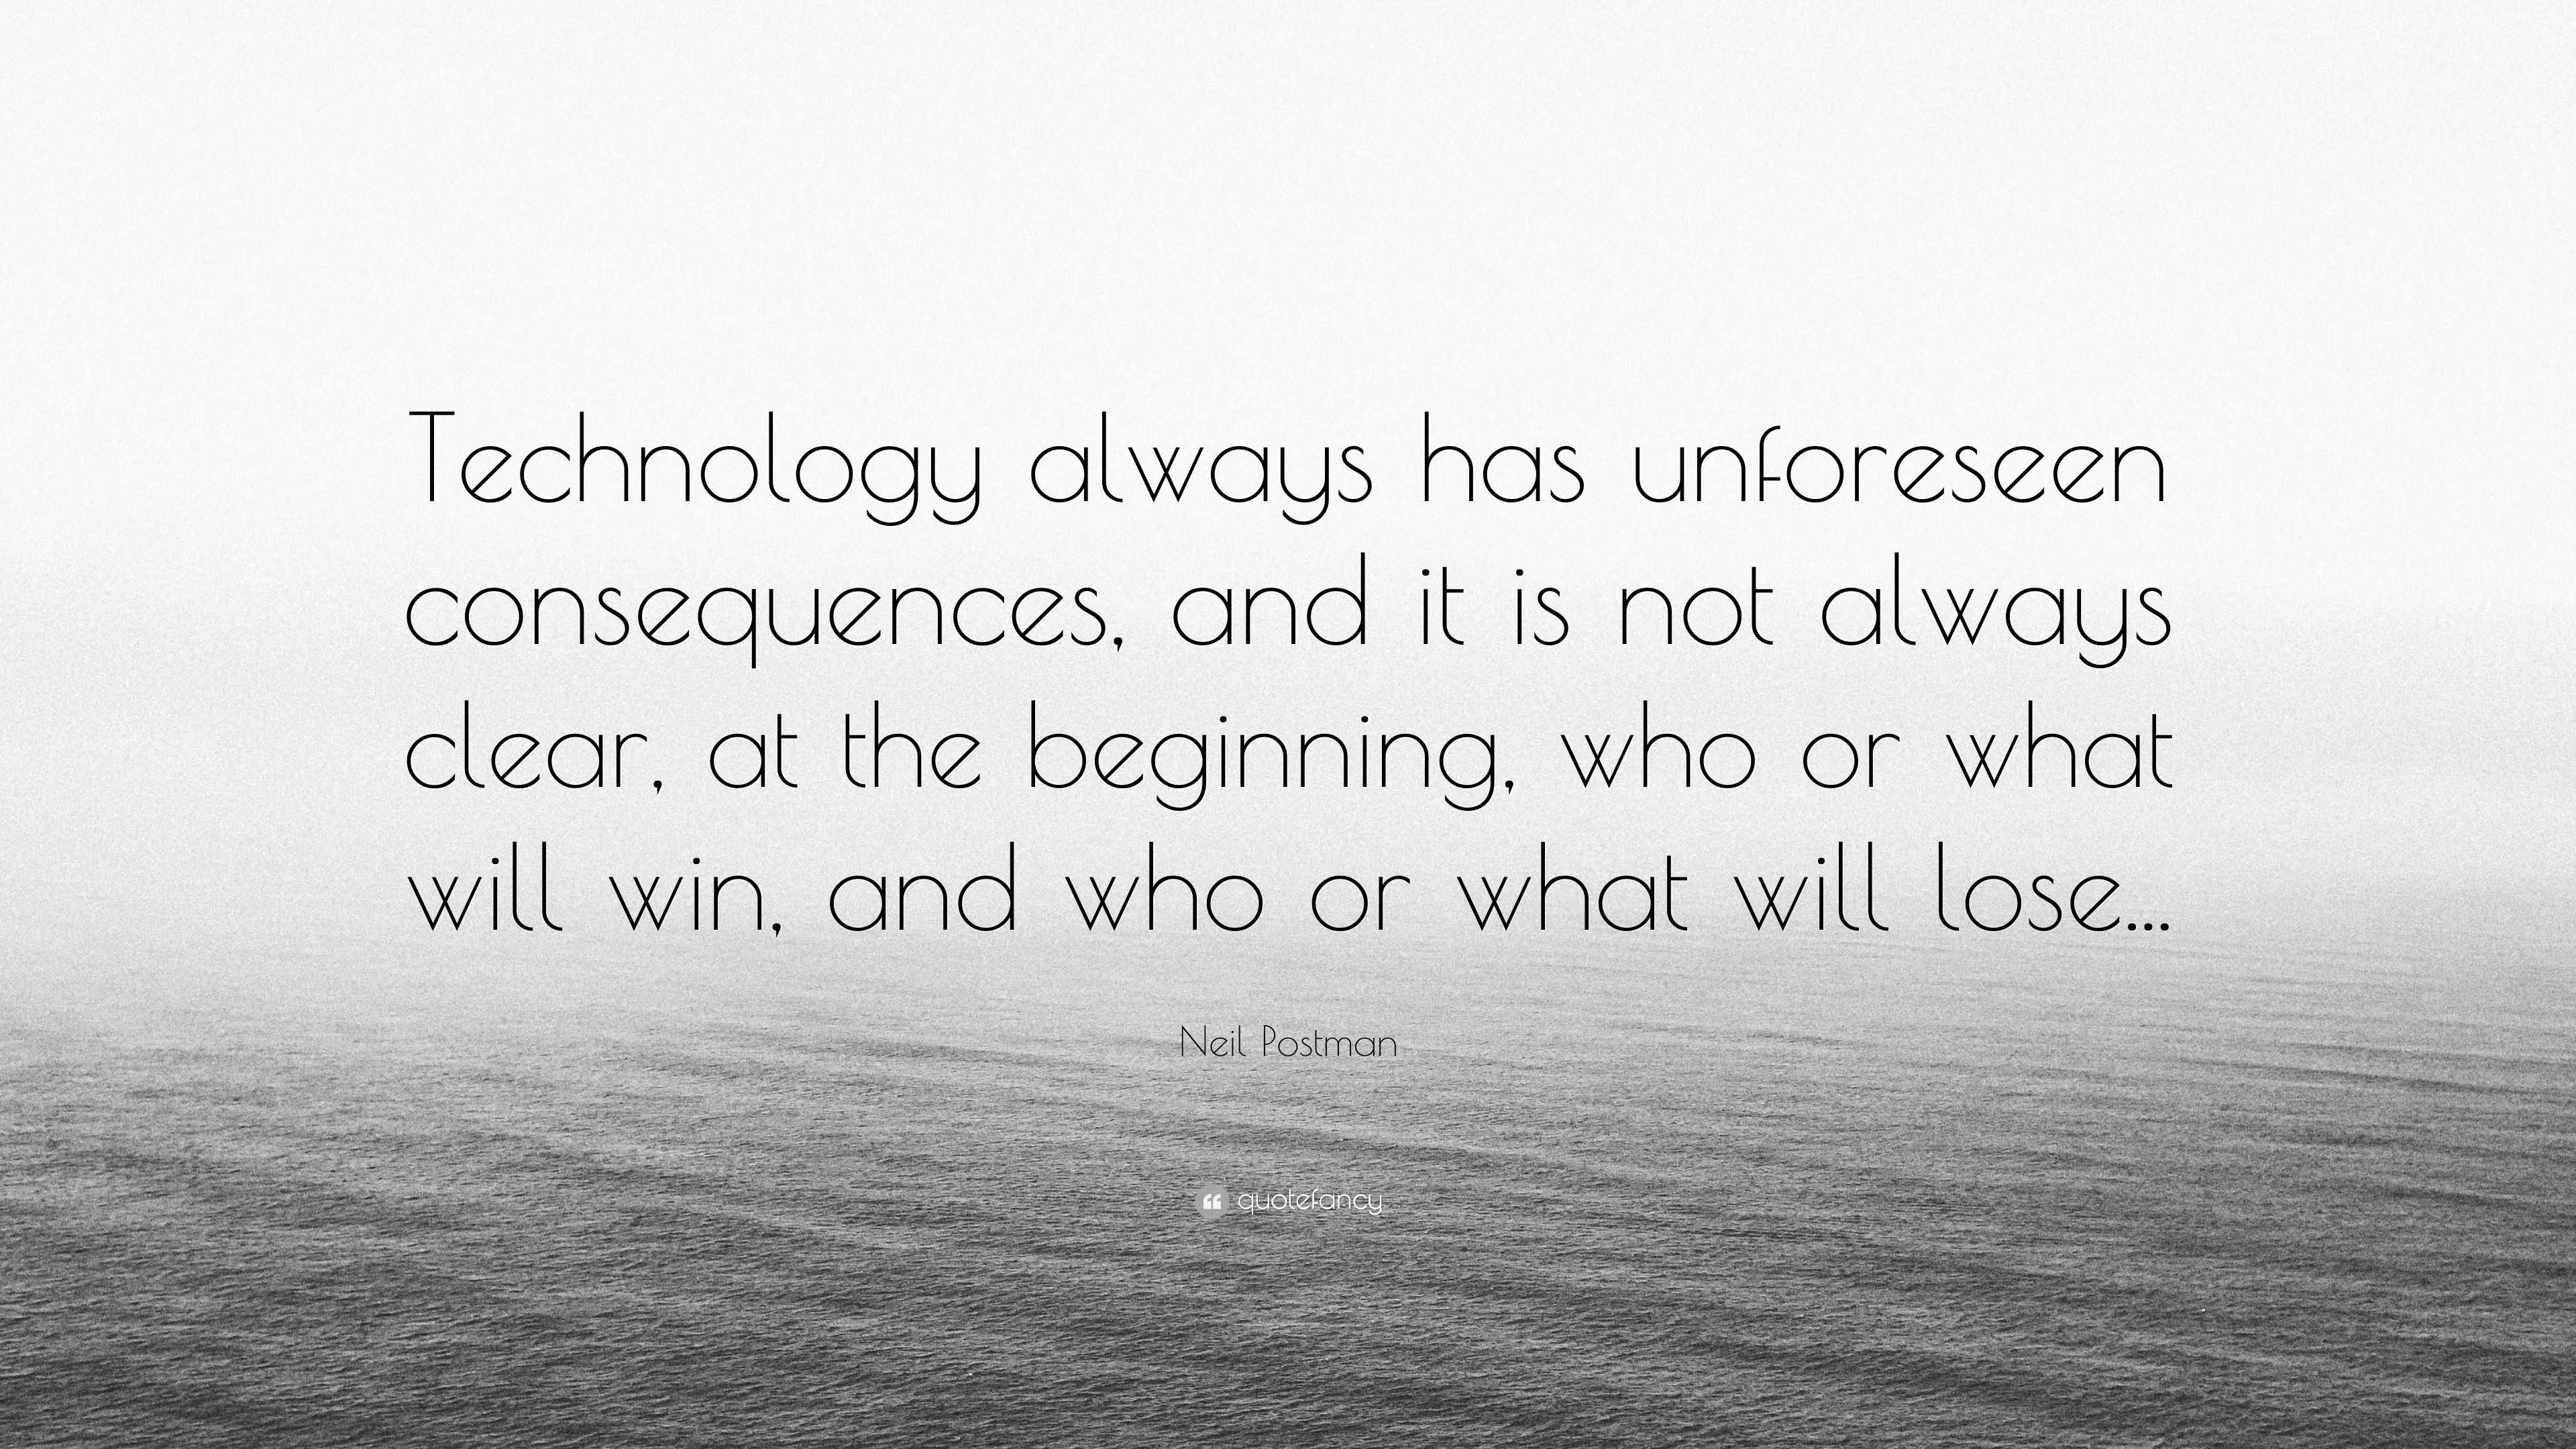 Neil Postman Quote: “Technology always has unforeseen consequences, and ...